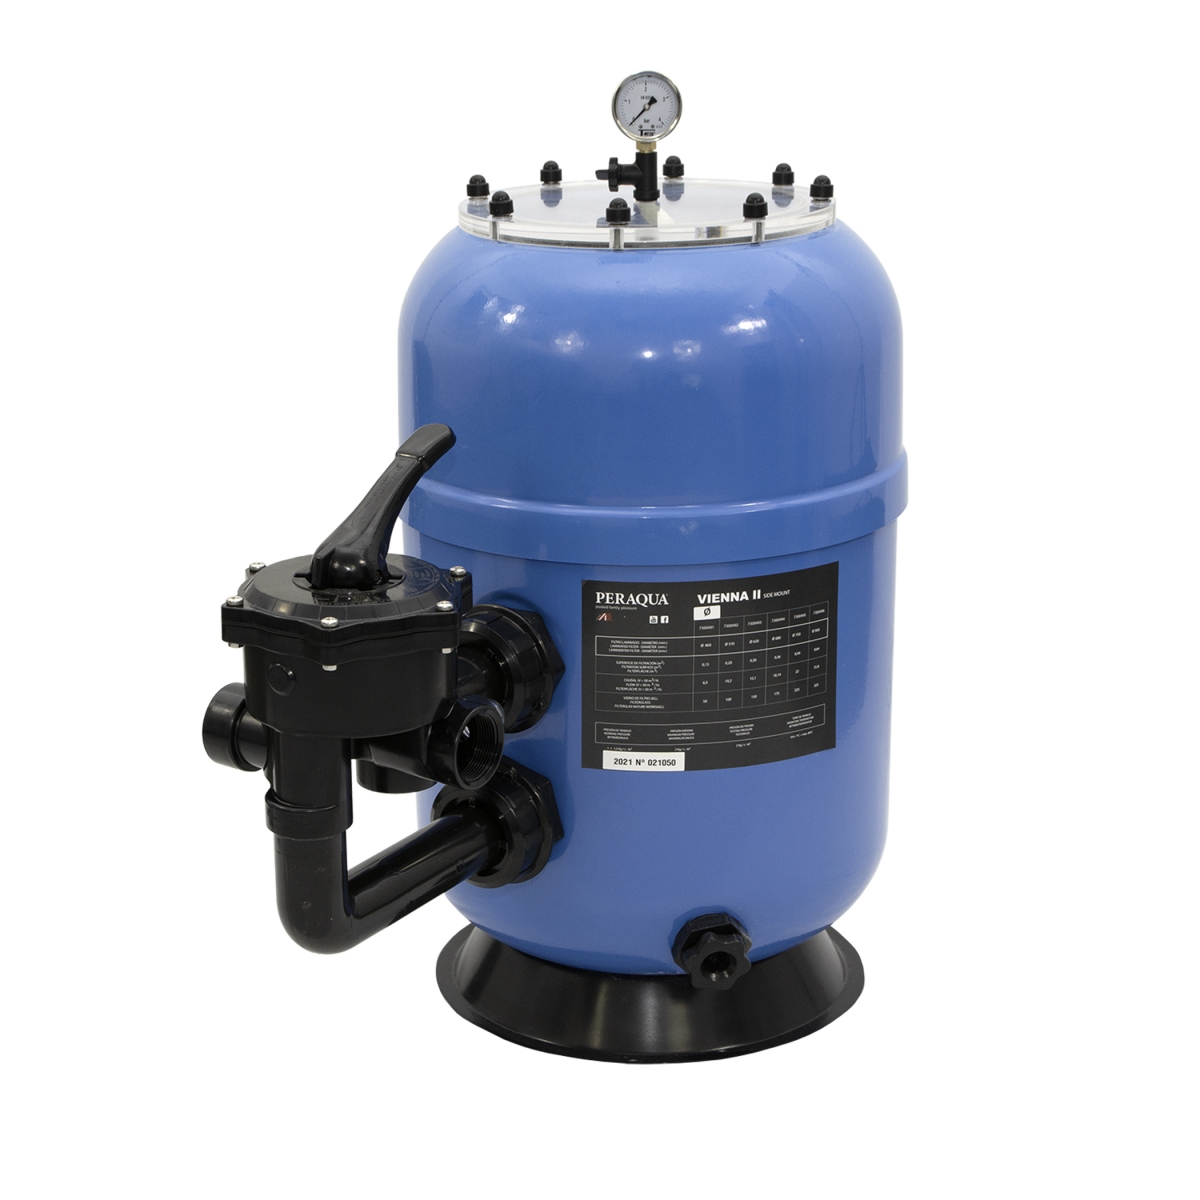 Polyester filter VIENNA II laminated, side mount, blue RAL5015, d400, with transparent flange cover, incl. manometer, piping kit and original Praher SM 1 ½" 6 way backwash valve manual Polyester filter VIENNA II laminated, side mount, blue RAL5015, d400, with transparent flange cover, incl. manometer, piping kit and original Praher SM 1 ½" 6 way backwash valve manual